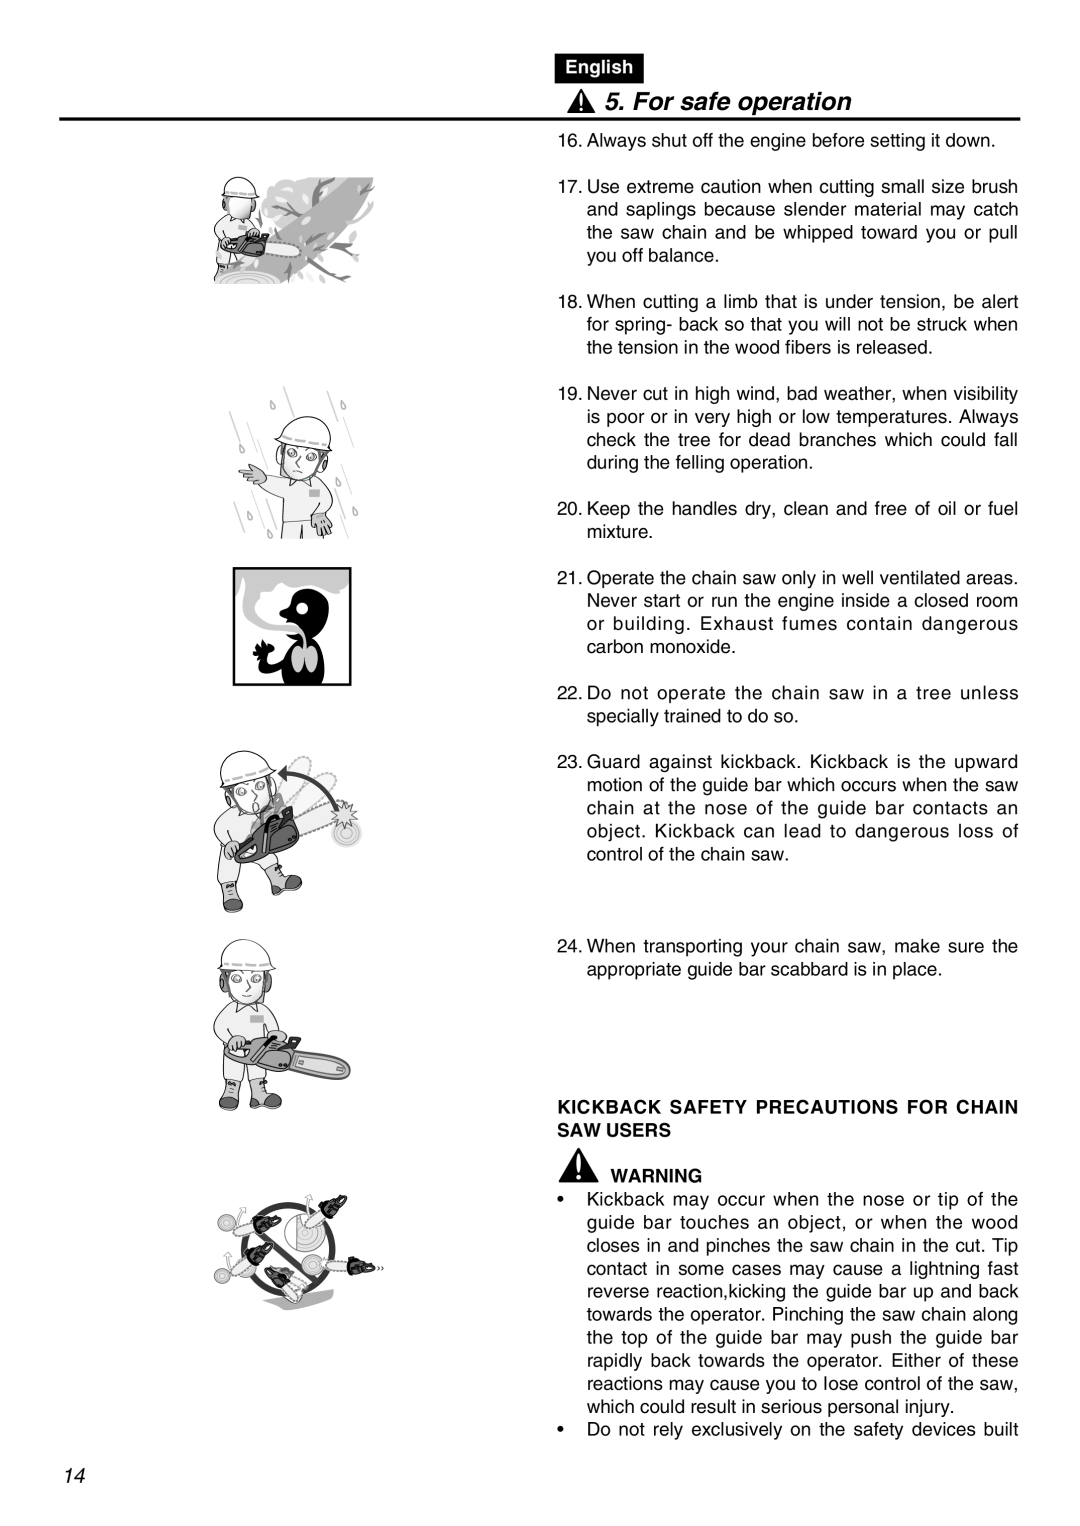 RedMax GZ400 manual For safe operation, English, Kickback Safety Precautions For Chain Saw Users 